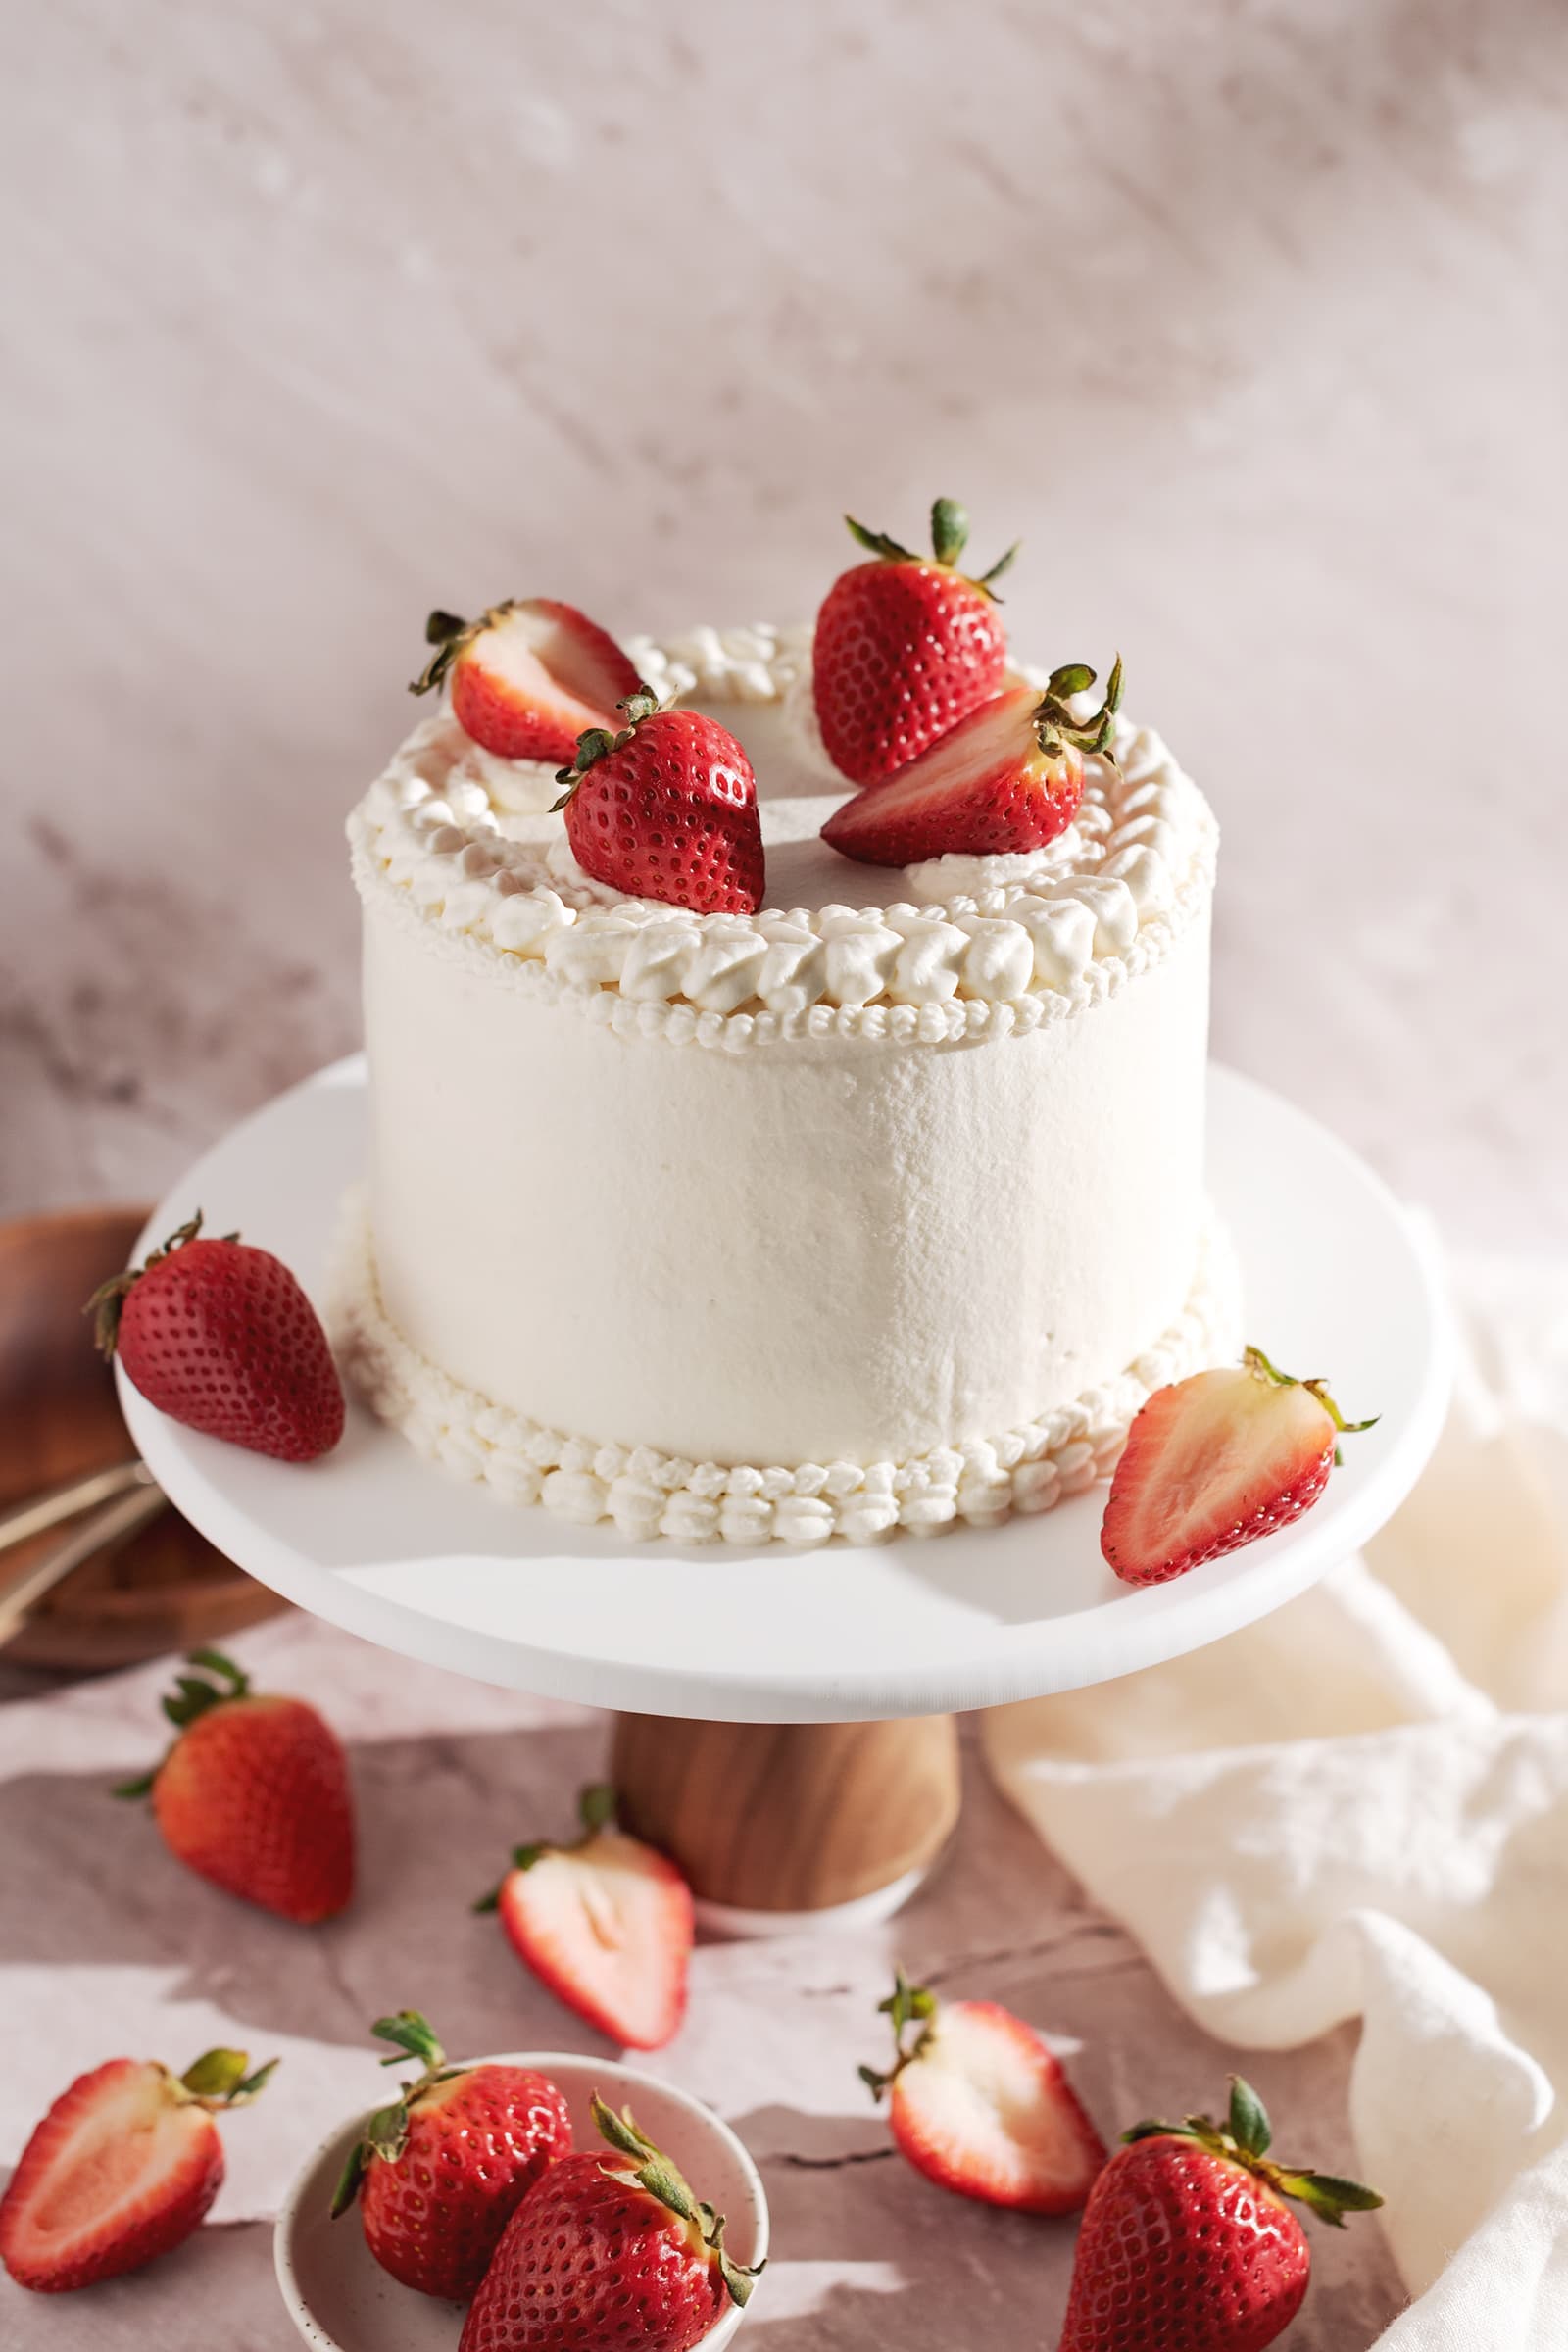 Cake covered in whipped cream and strawberries on a cake stand.